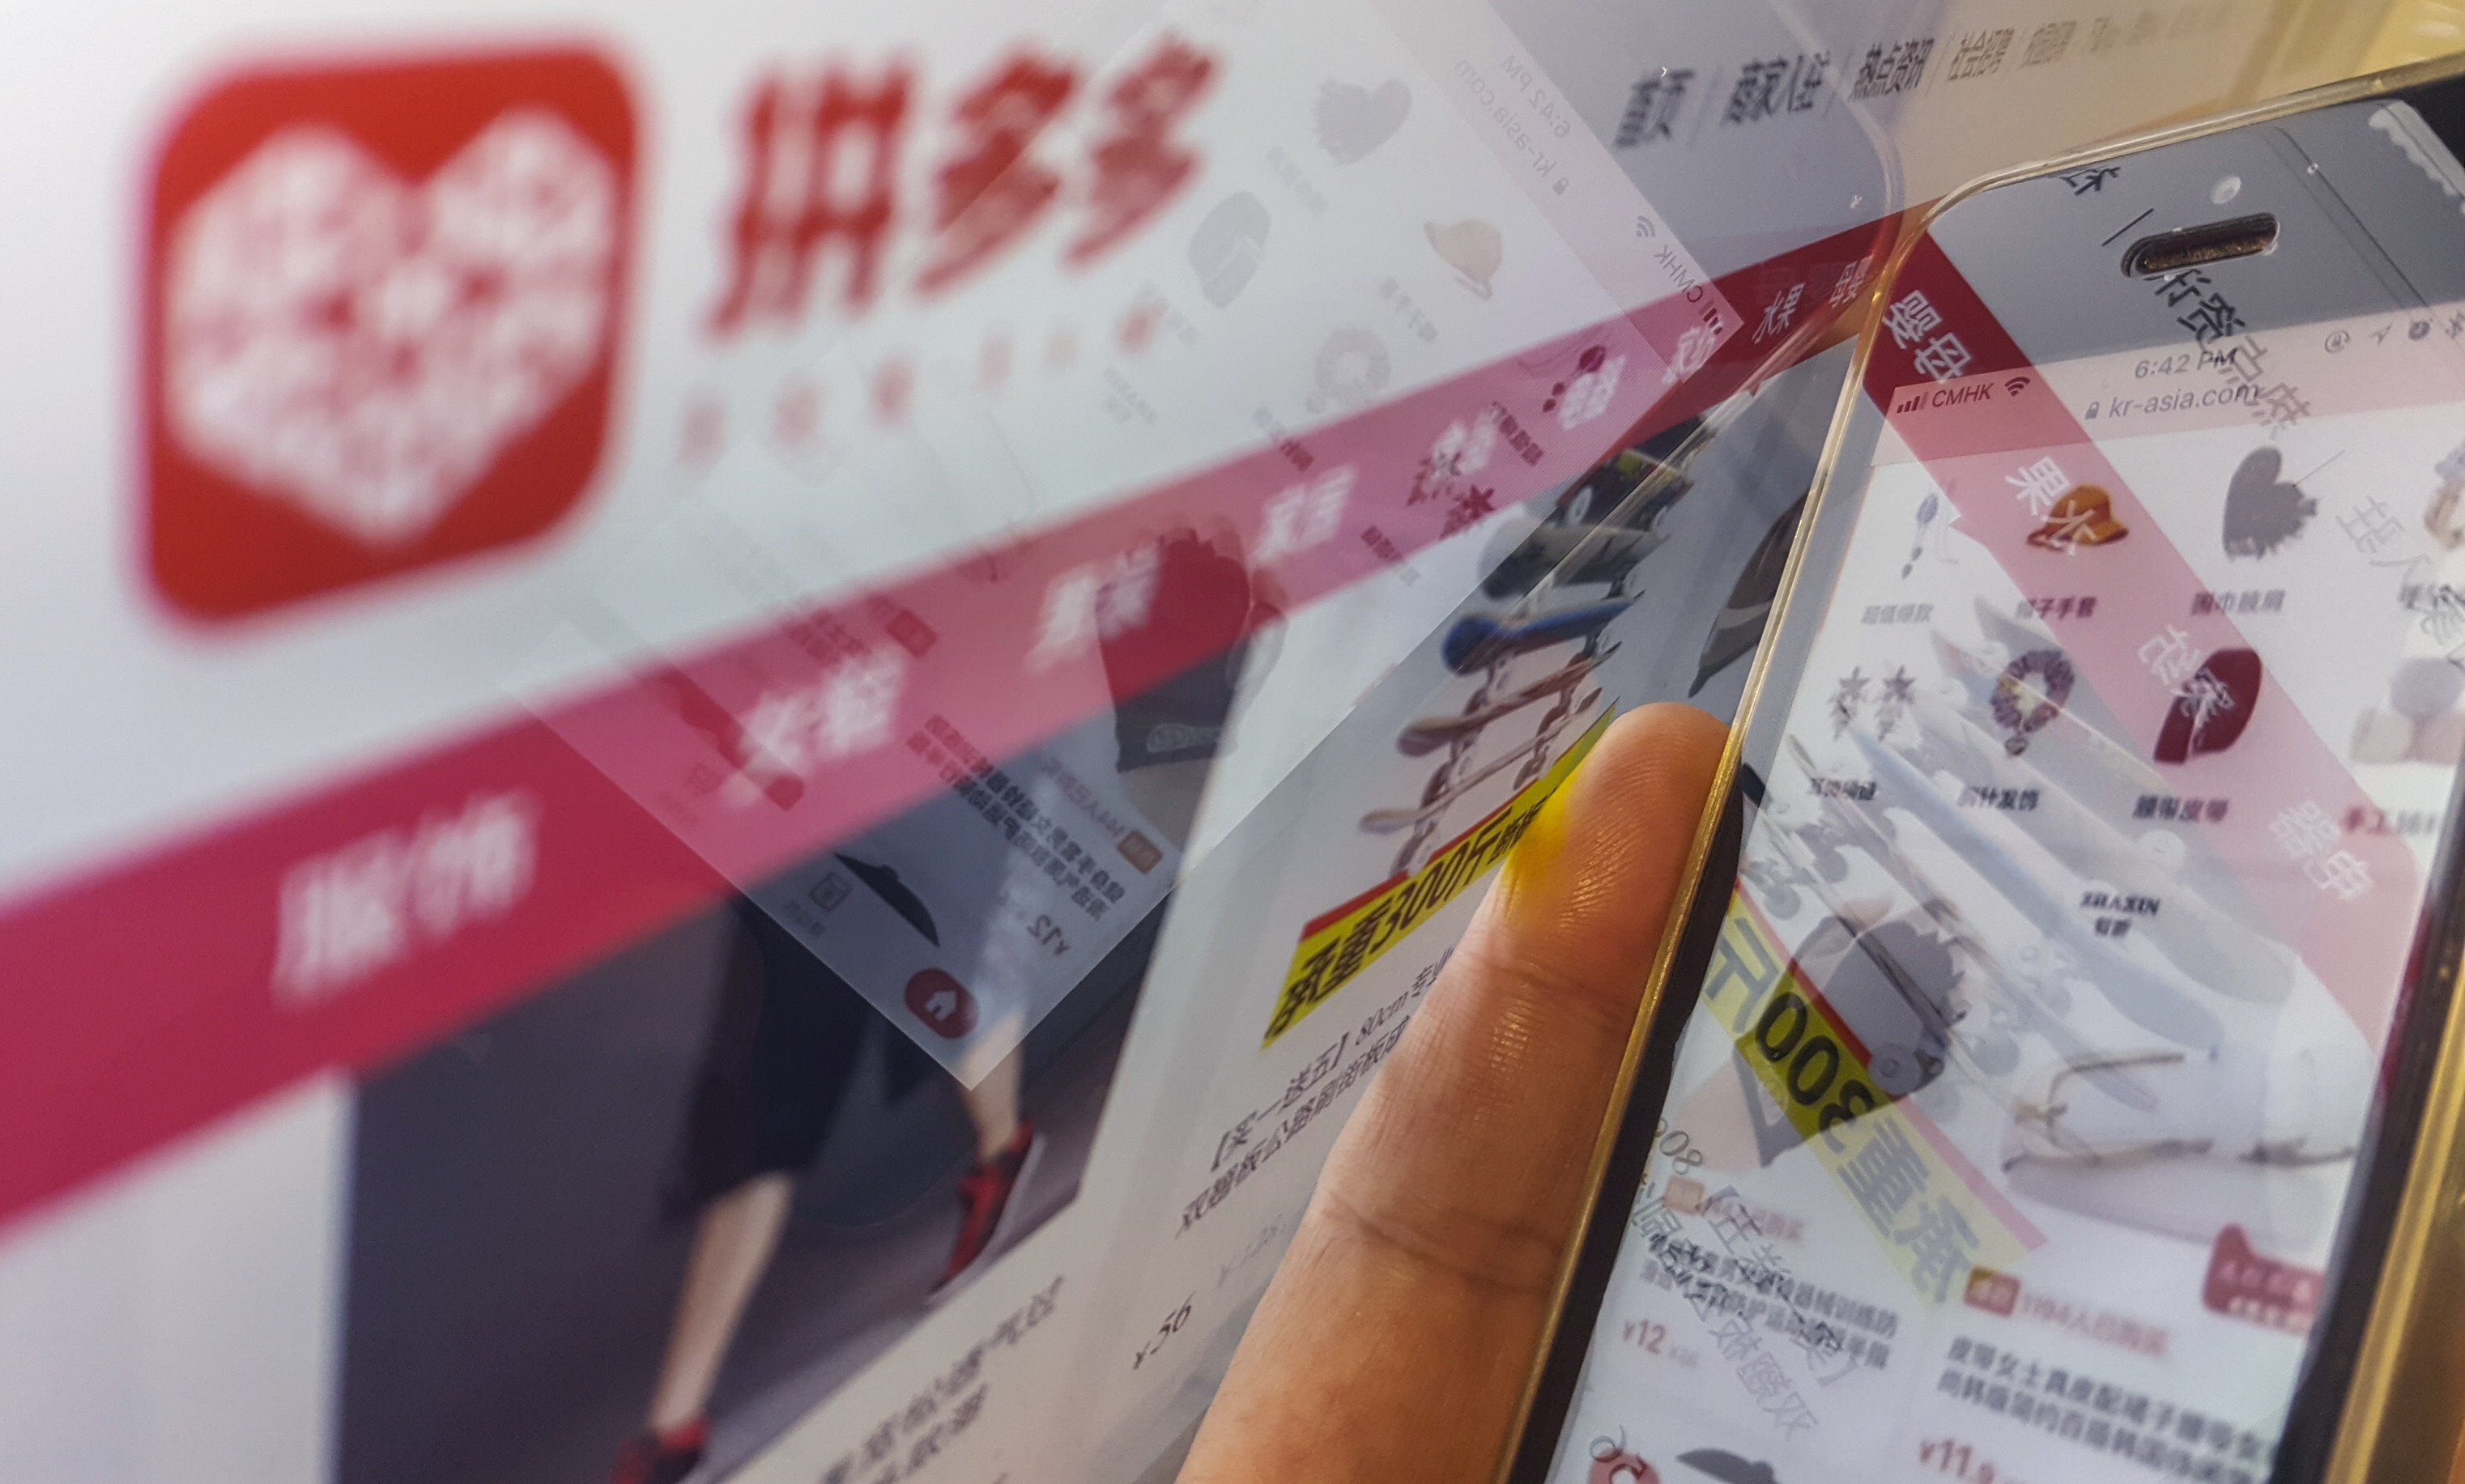 E-commerce giant Pinduoduo is not expected to give away cash via virtual red packets at this year’s Spring Festival Gala, the country’s most-watched national network TV broadcast. Photo: SCMP